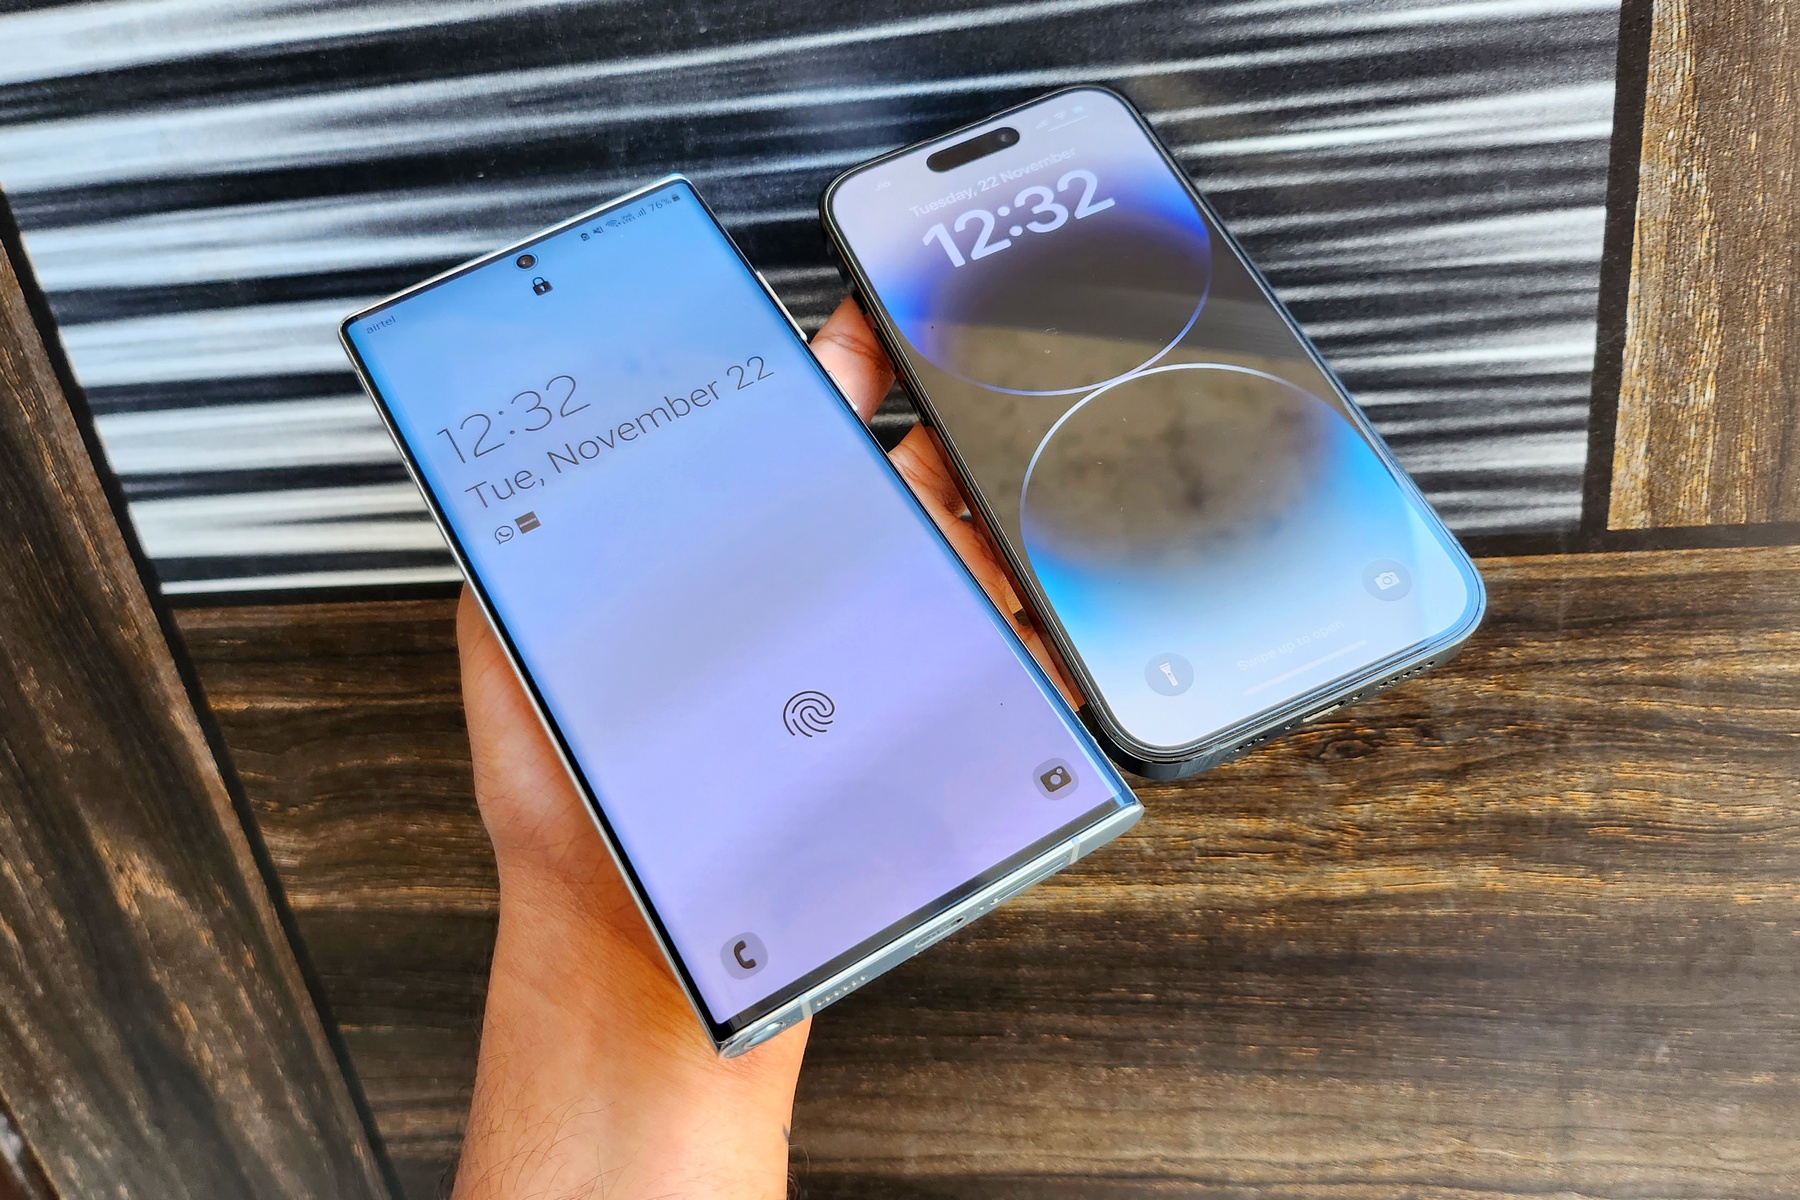 Apple vs. Samsung: Who has the best lock screen
customization in 2022?